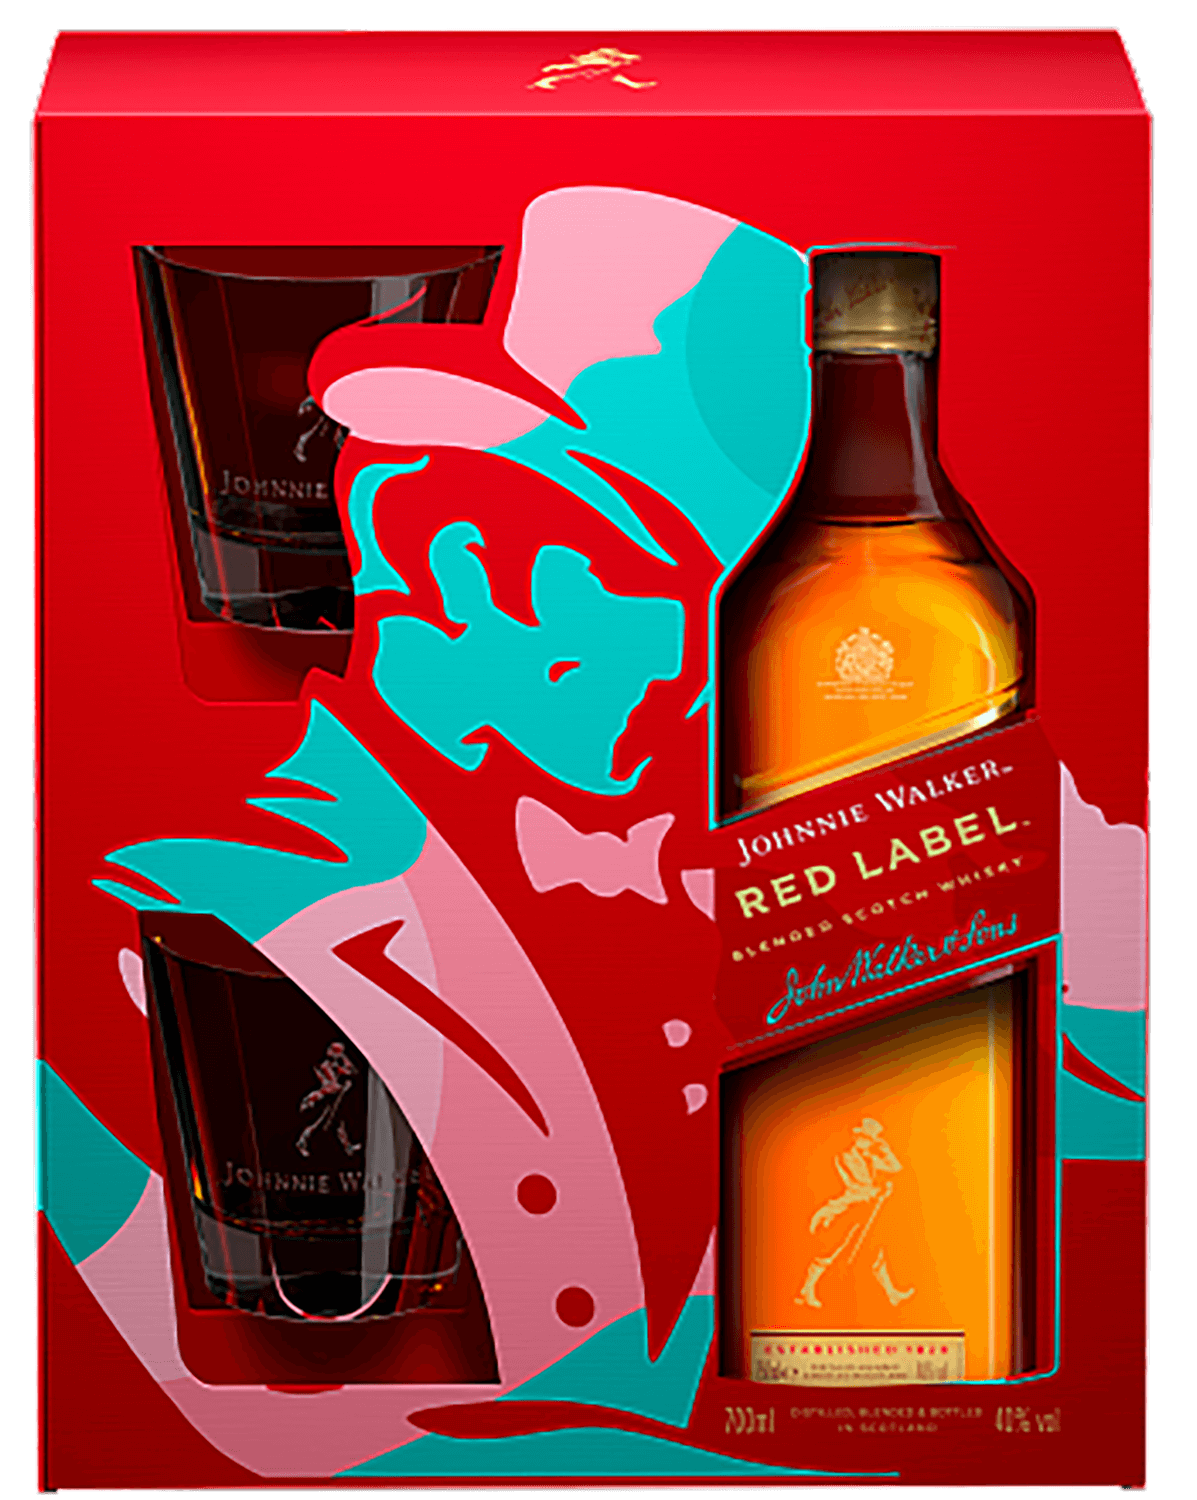 Johnnie Walker Red Label Blended Scotch Whisky (gift box with 2 glasses) johnnie walker gold label blended scotch whisky gift box